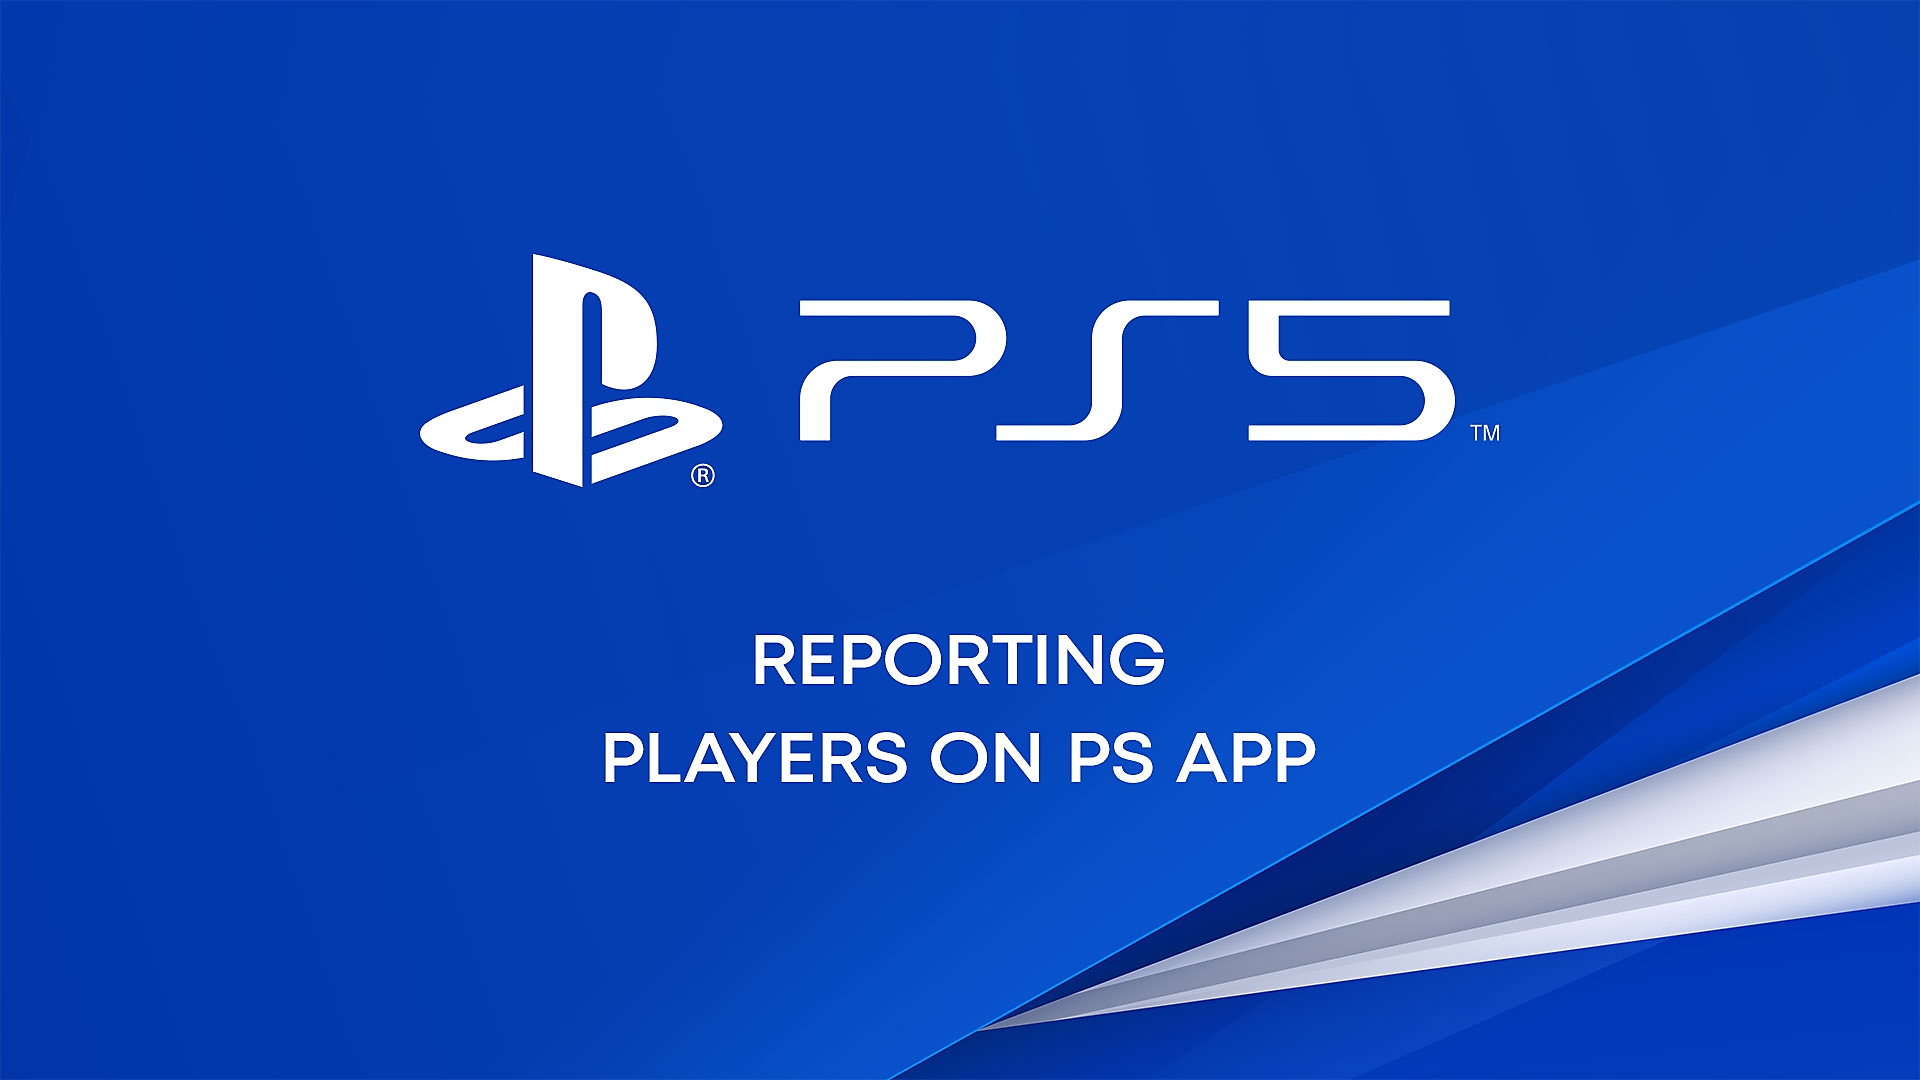 Youtube video about how to report players on PS App.